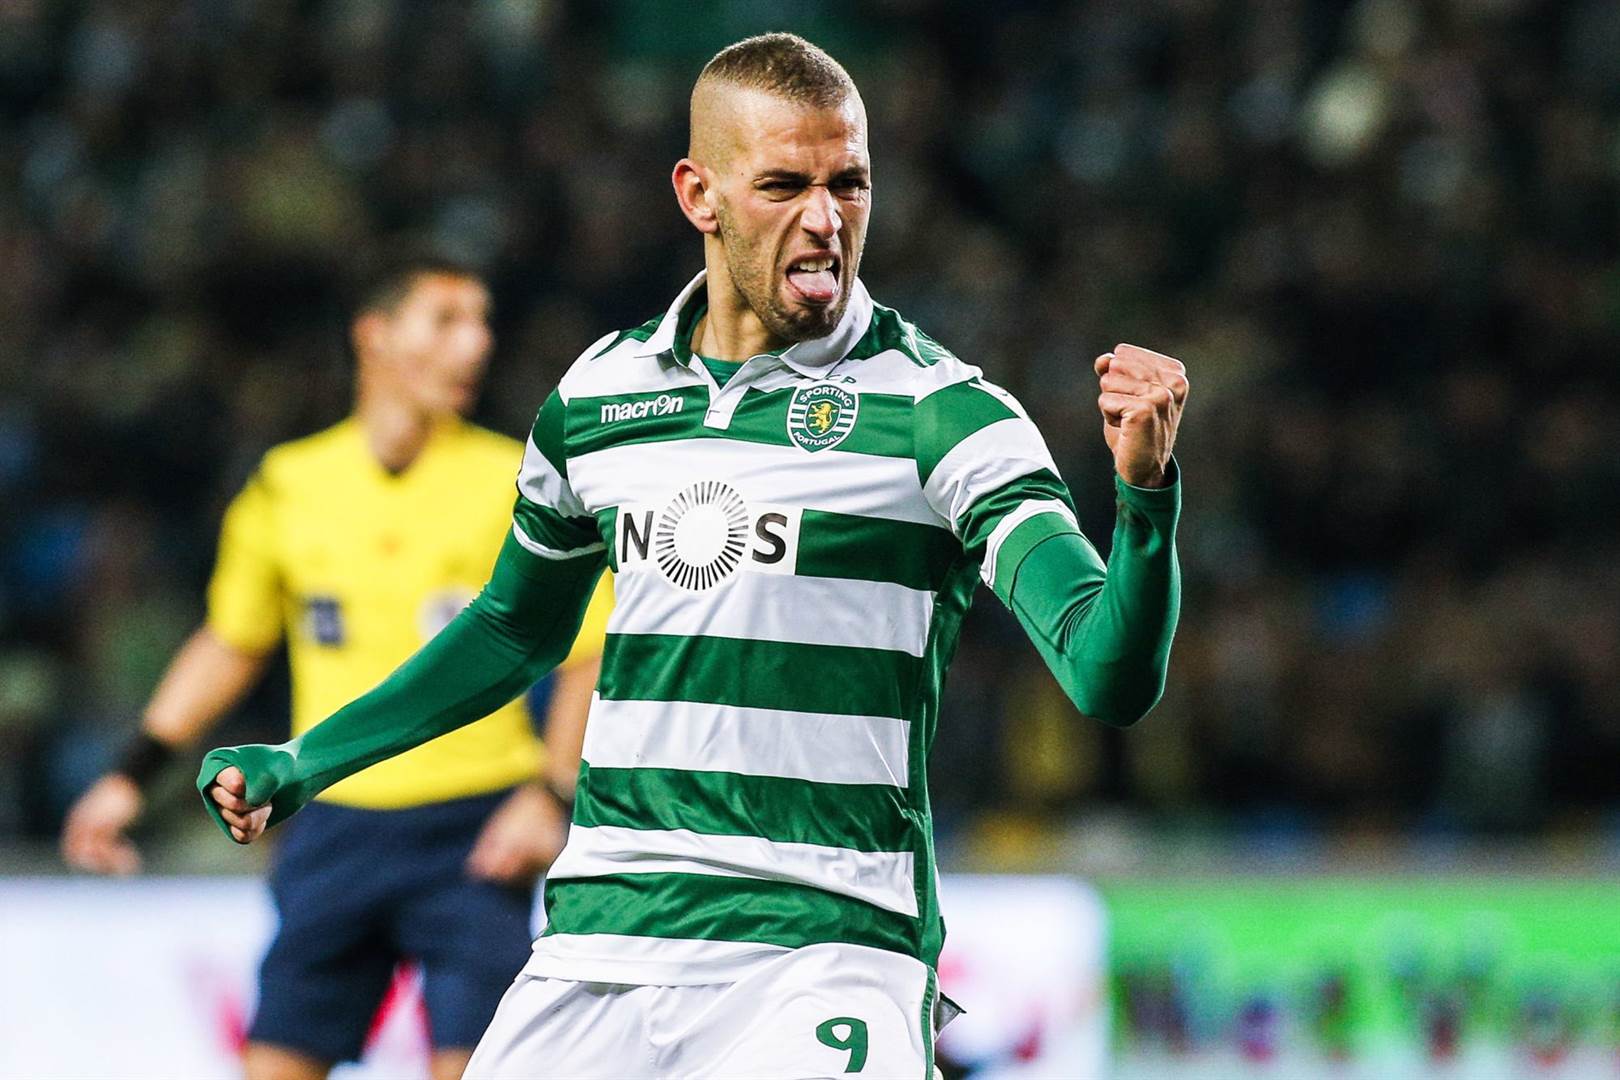 Confirmed deal - Islam Slimani to Sporting Lisbon 